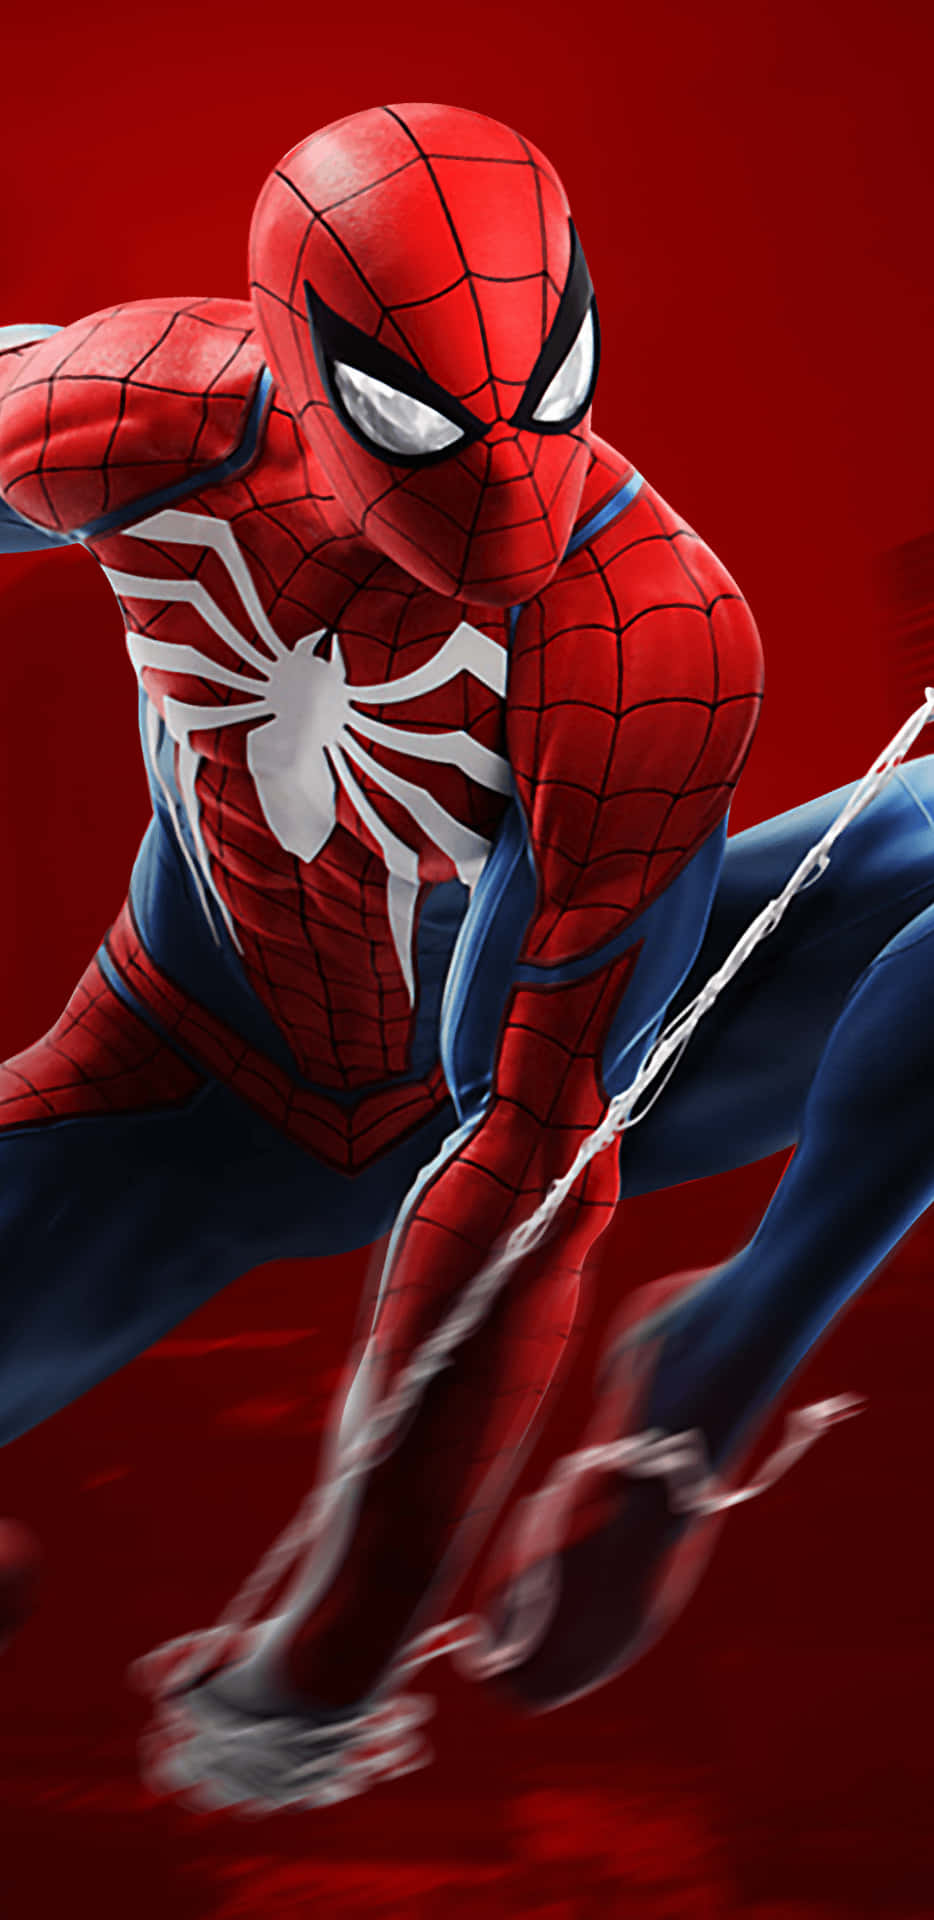 Feel the Cool Breeze of the City with Spider-Man Wallpaper